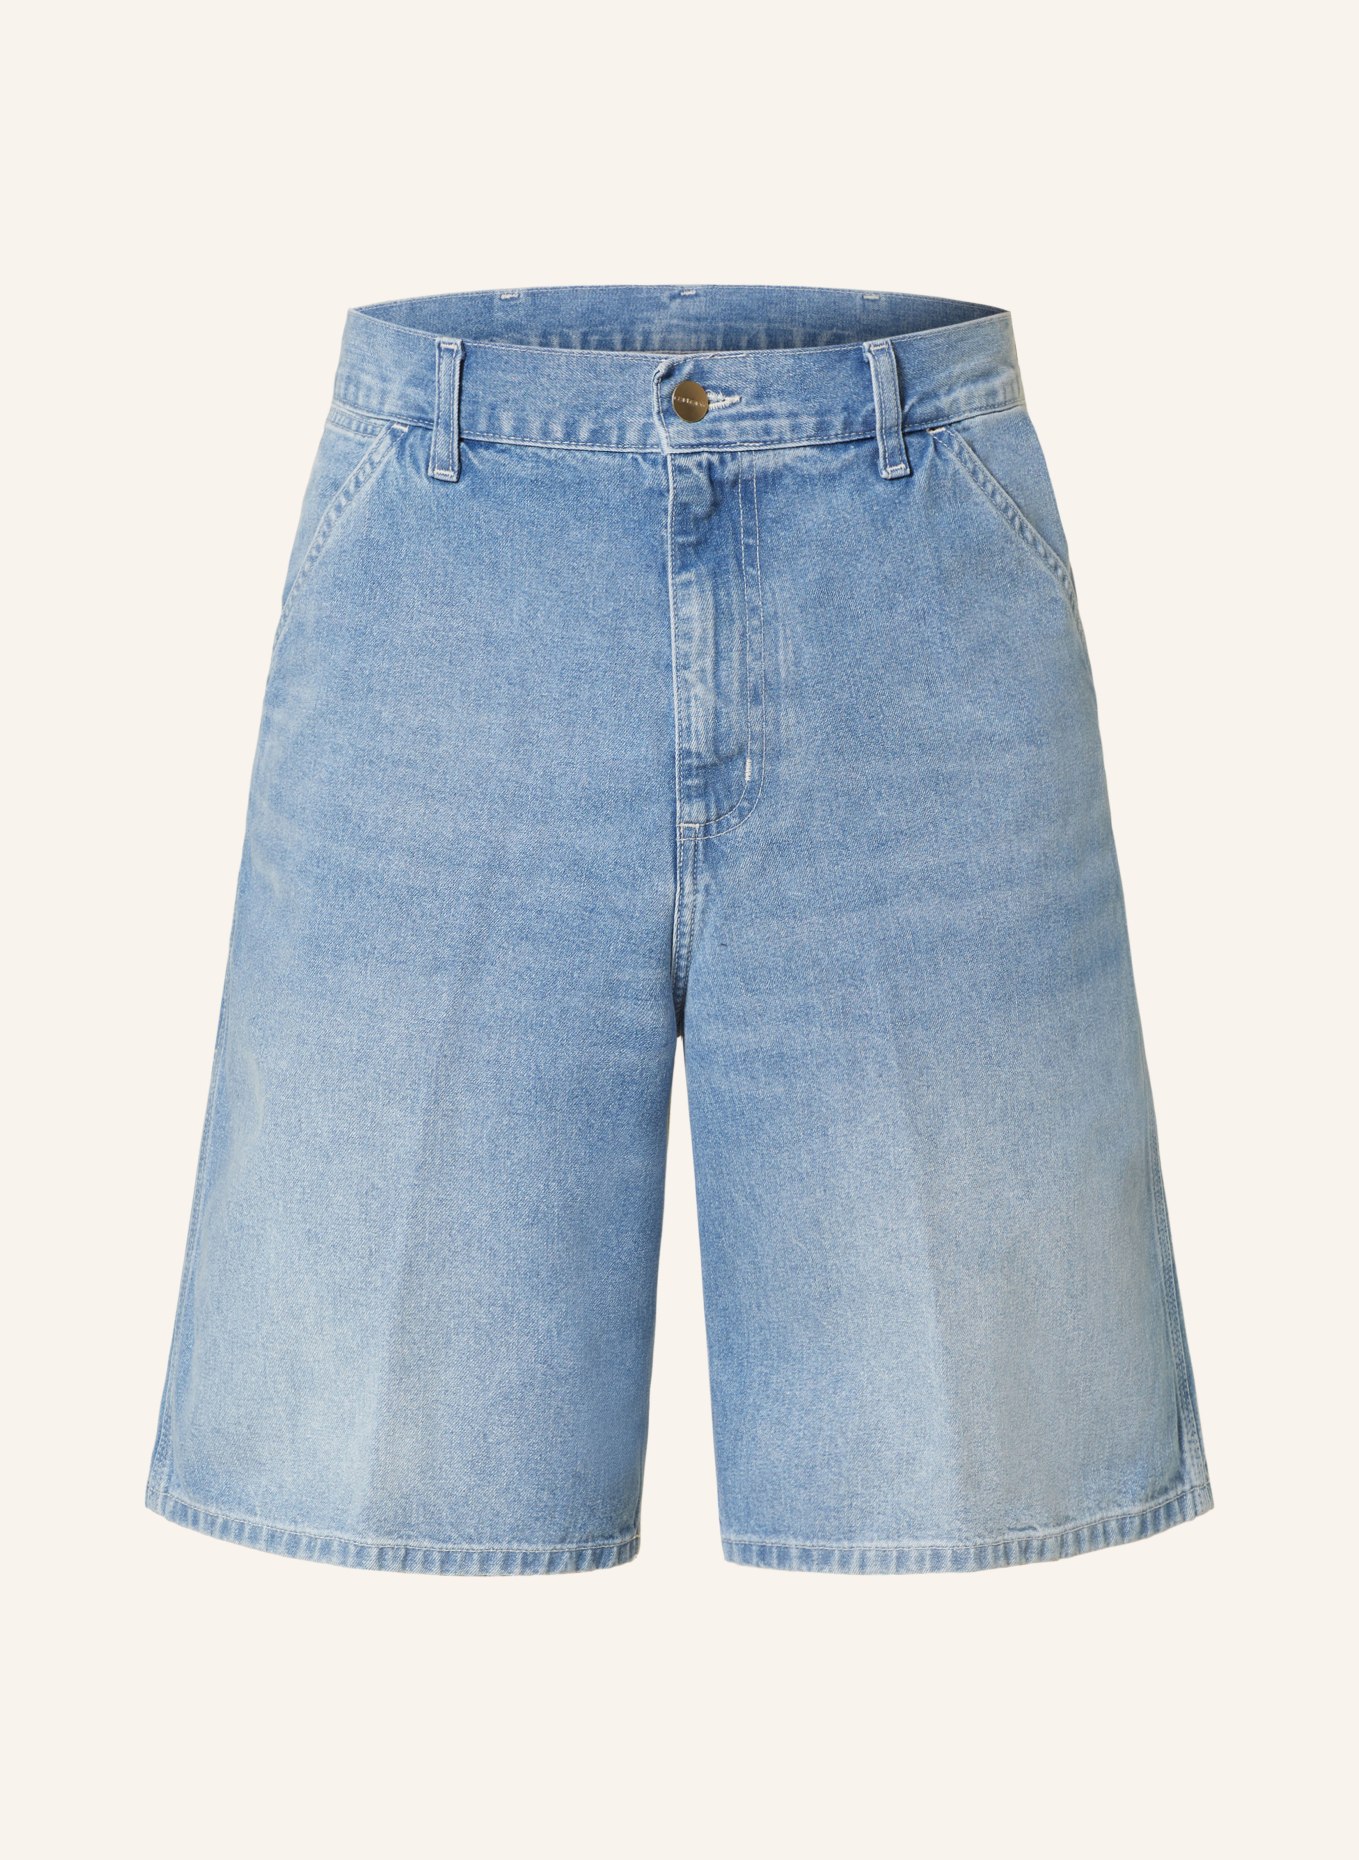 carhartt WIP Jeans-Shorts NORCO Relaxed Fit, Farbe: I033333 01ZO BLUE LIGHT TRUE WASHED (Bild 1)